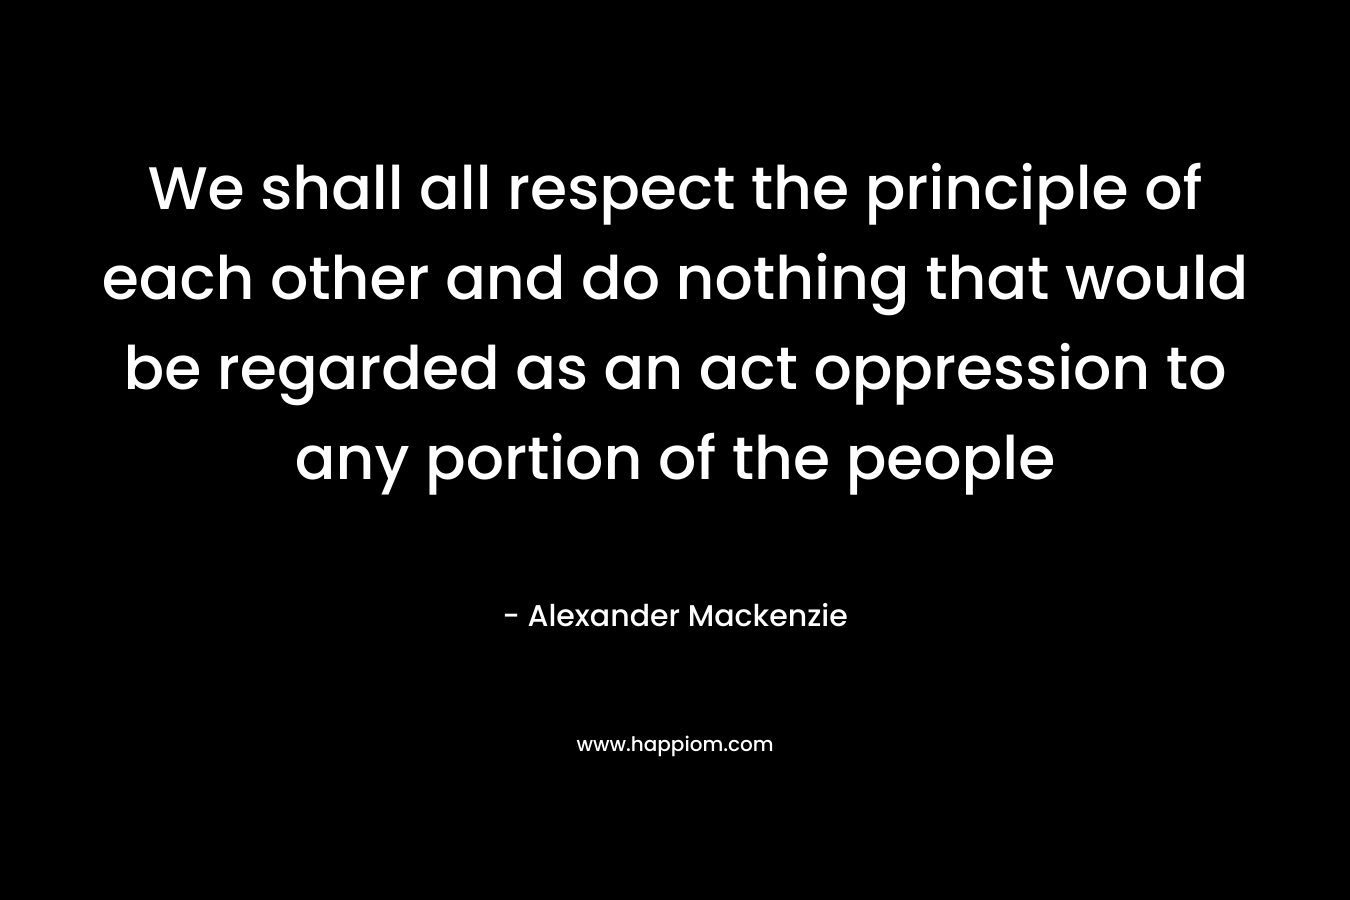 We shall all respect the principle of each other and do nothing that would be regarded as an act oppression to any portion of the people – Alexander Mackenzie